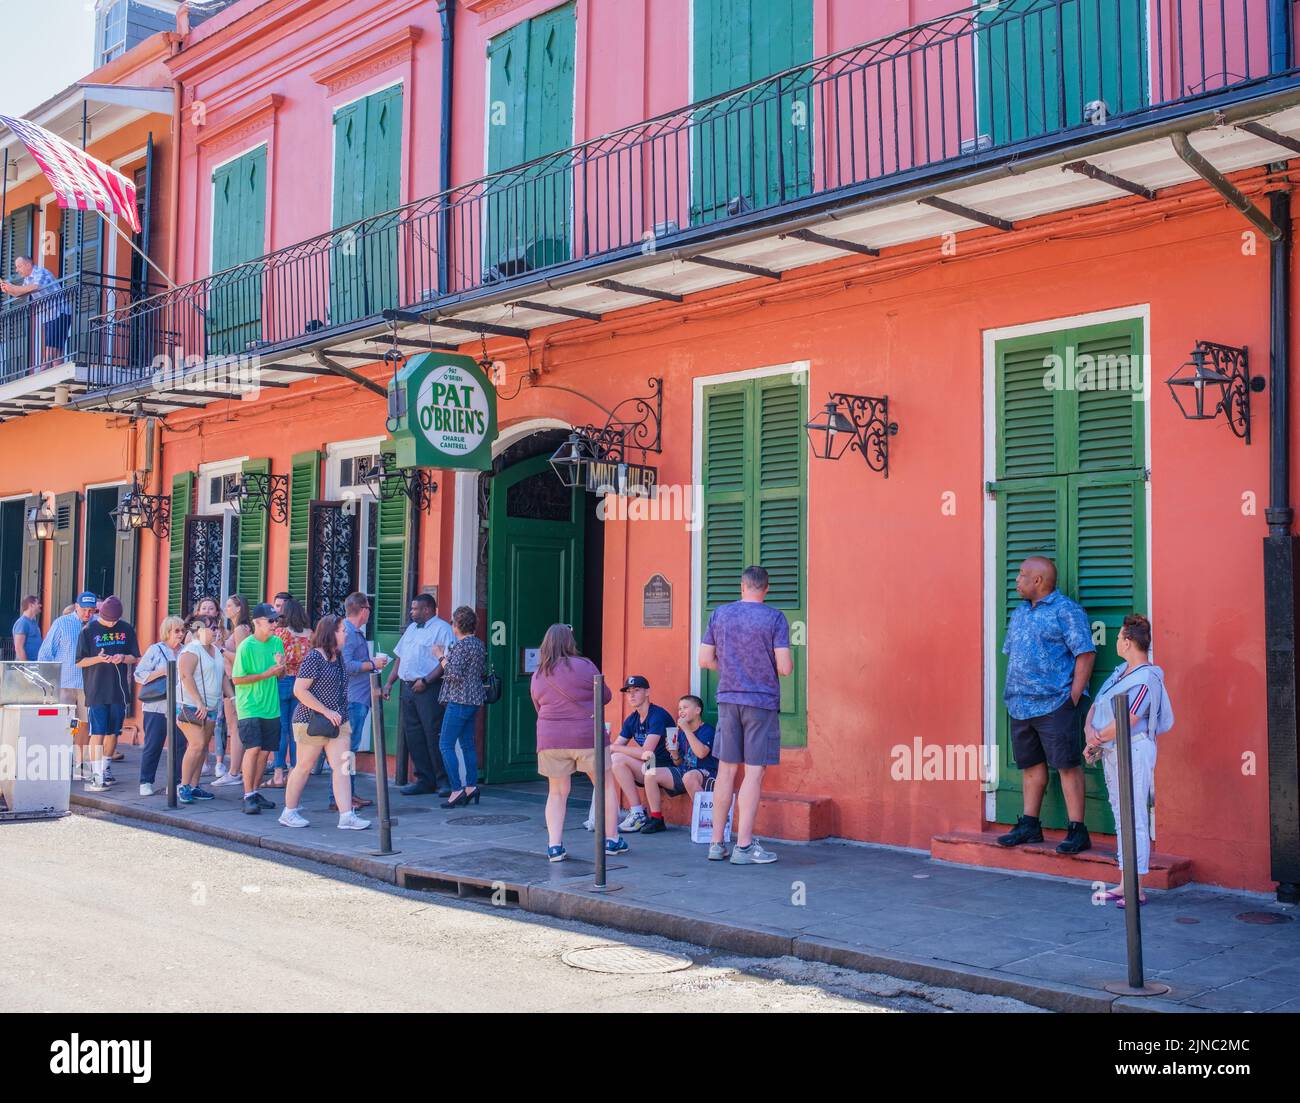 NEW ORLEANS, LA, USA - APRIL 3, 2022: People waiting in front of world famous Pat O'Brien's on St. Peter Street in the French Quarter Stock Photo